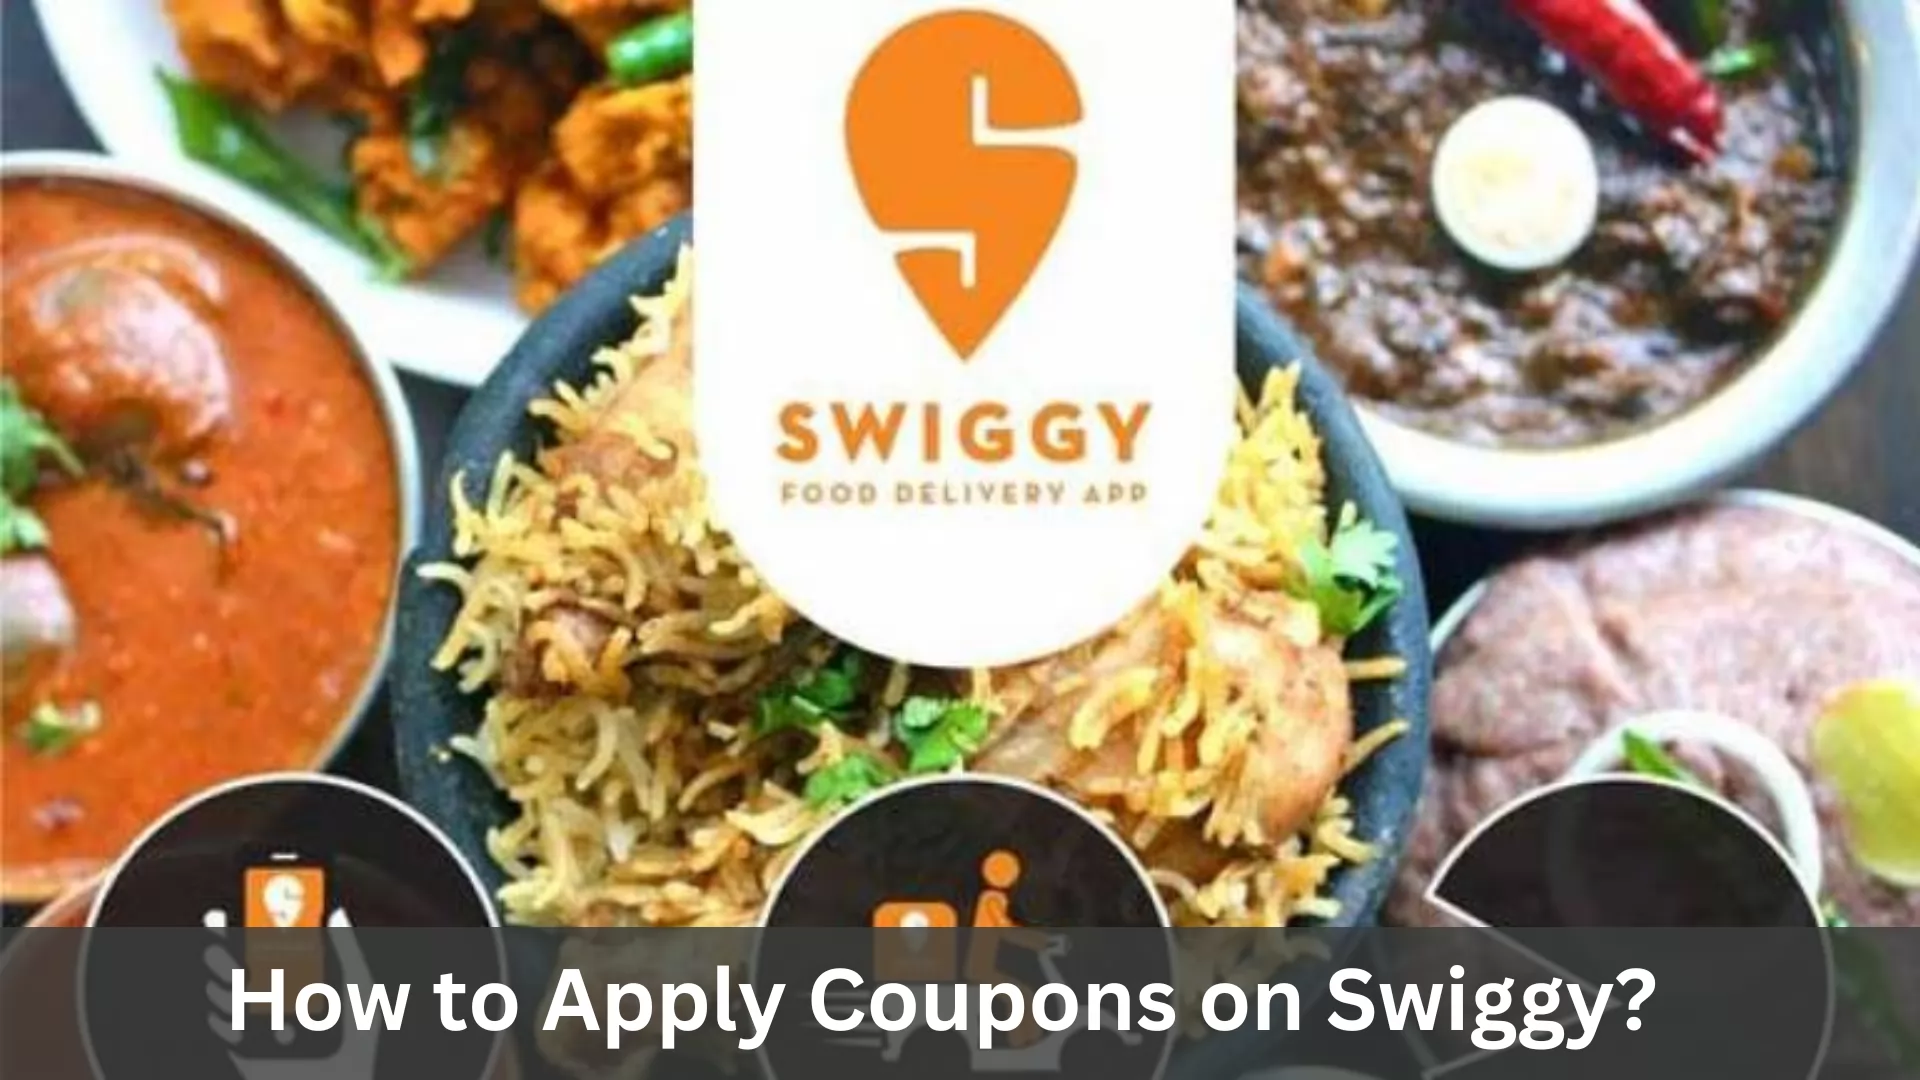 How to Apply Coupons on Swiggy?